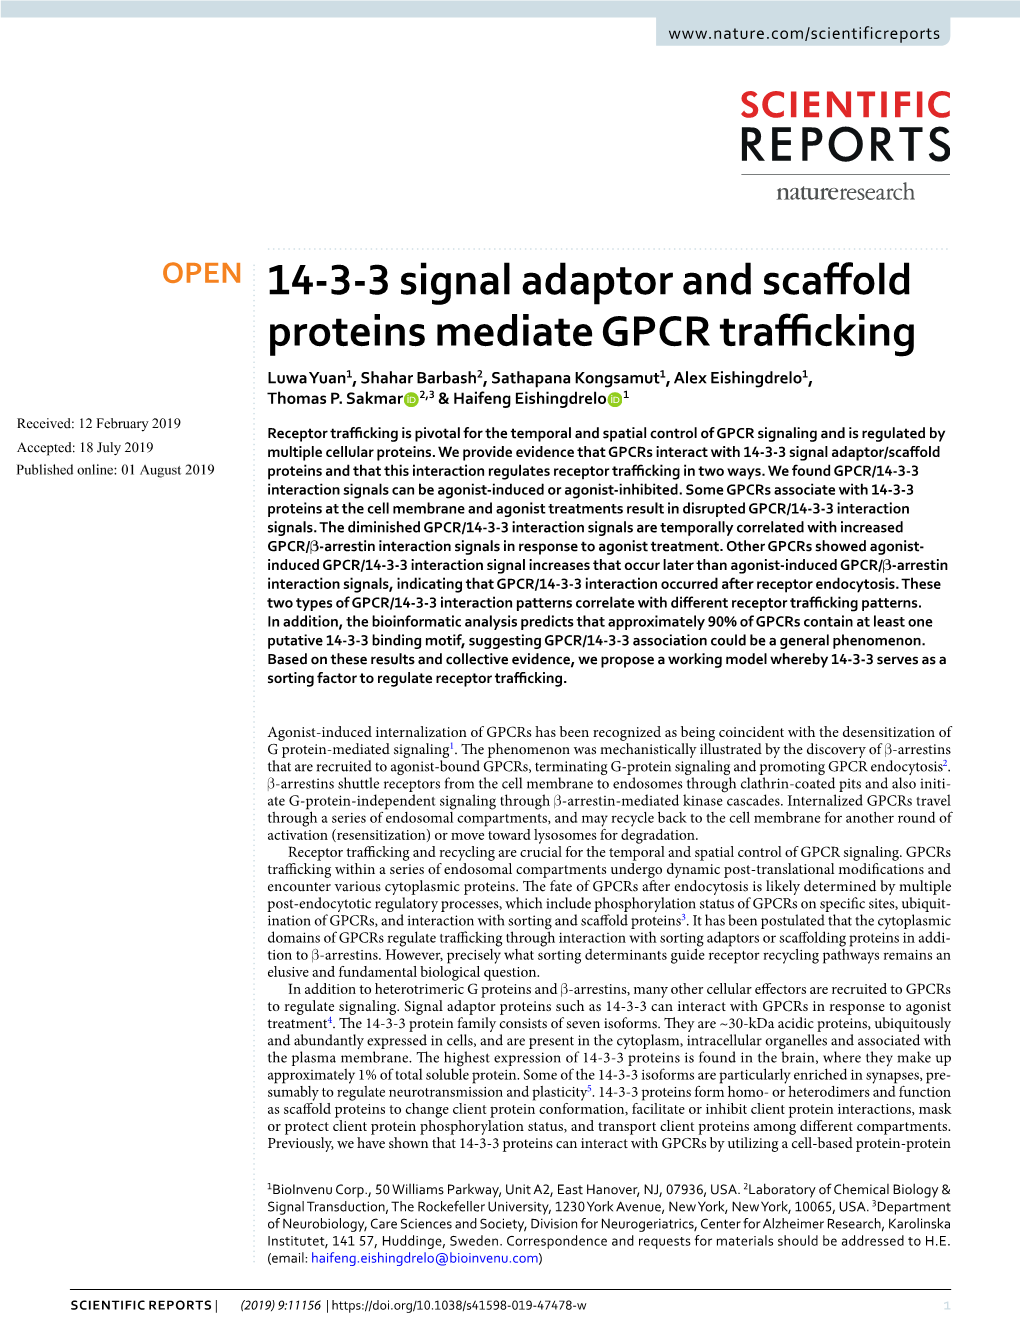 14-3-3 Signal Adaptor and Scaffold Proteins Mediate GPCR Trafficking